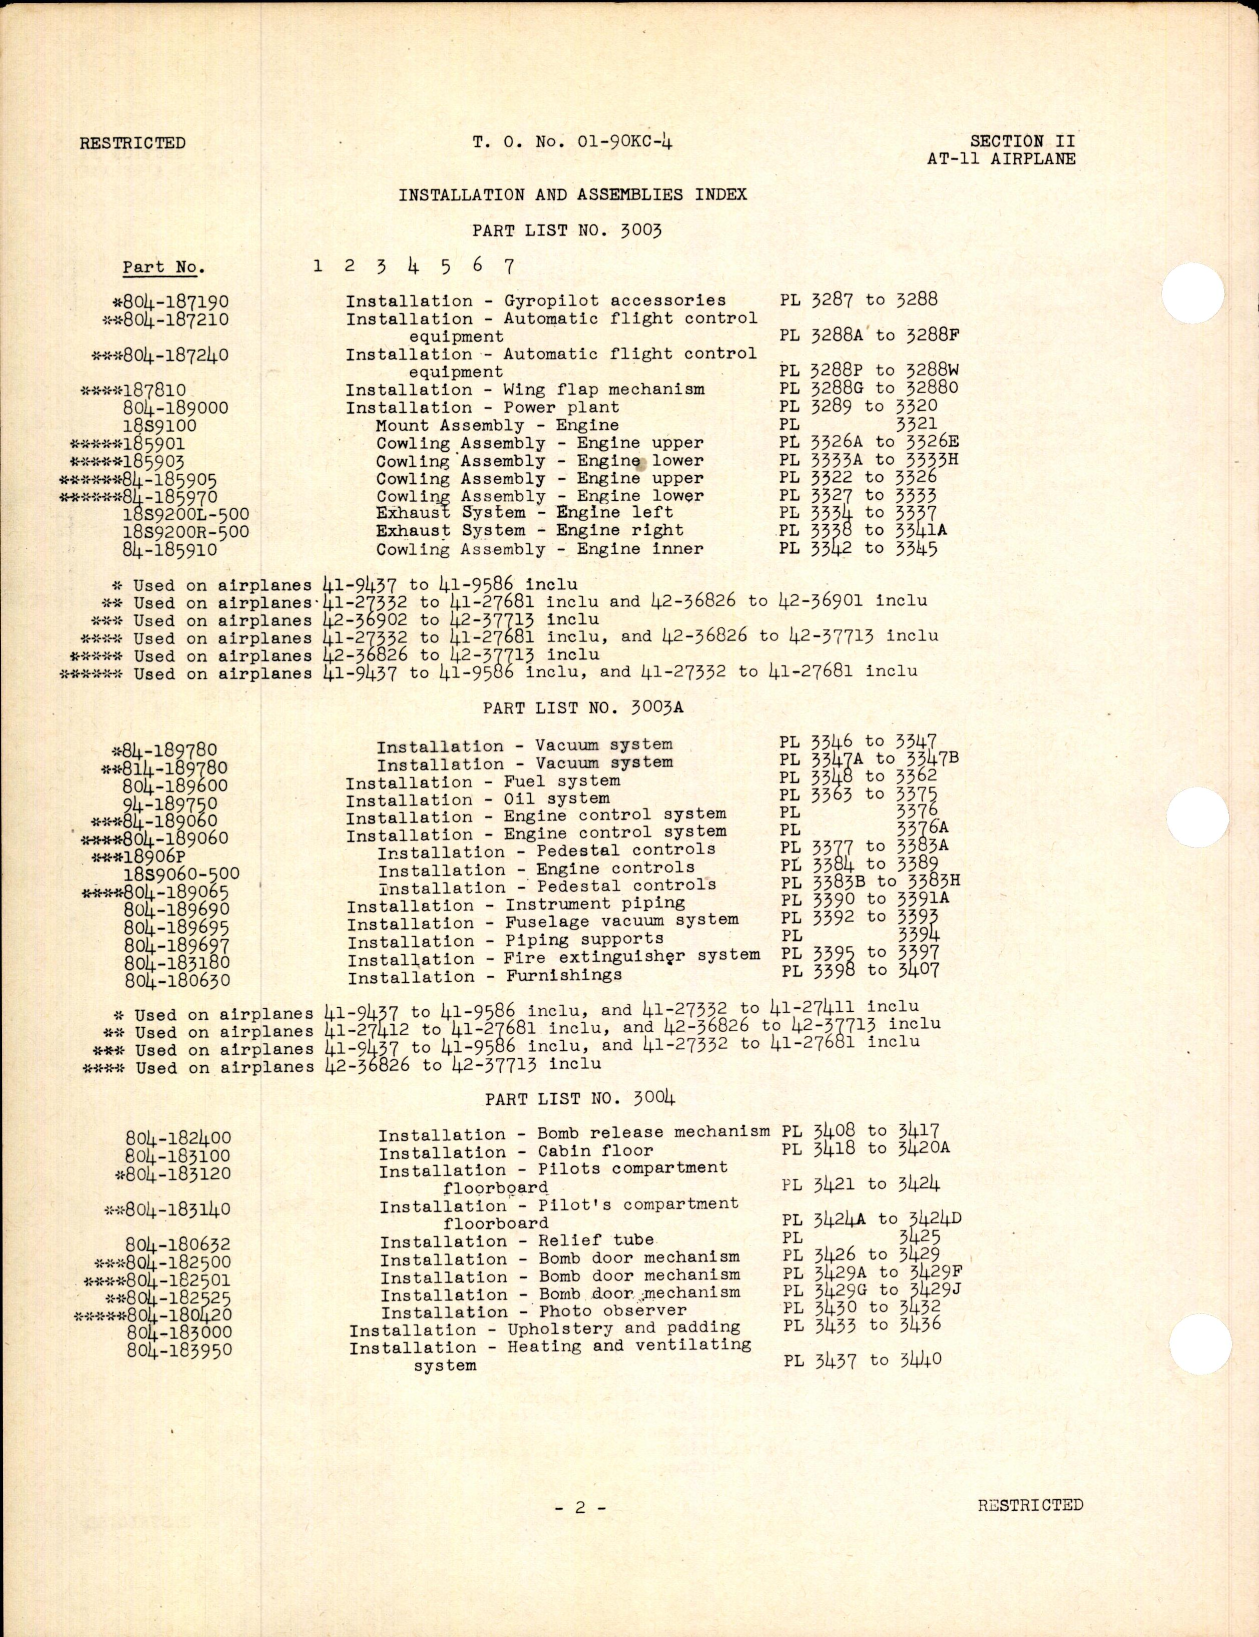 Sample page 6 from AirCorps Library document: Parts Catalog for AT-11 Airplane